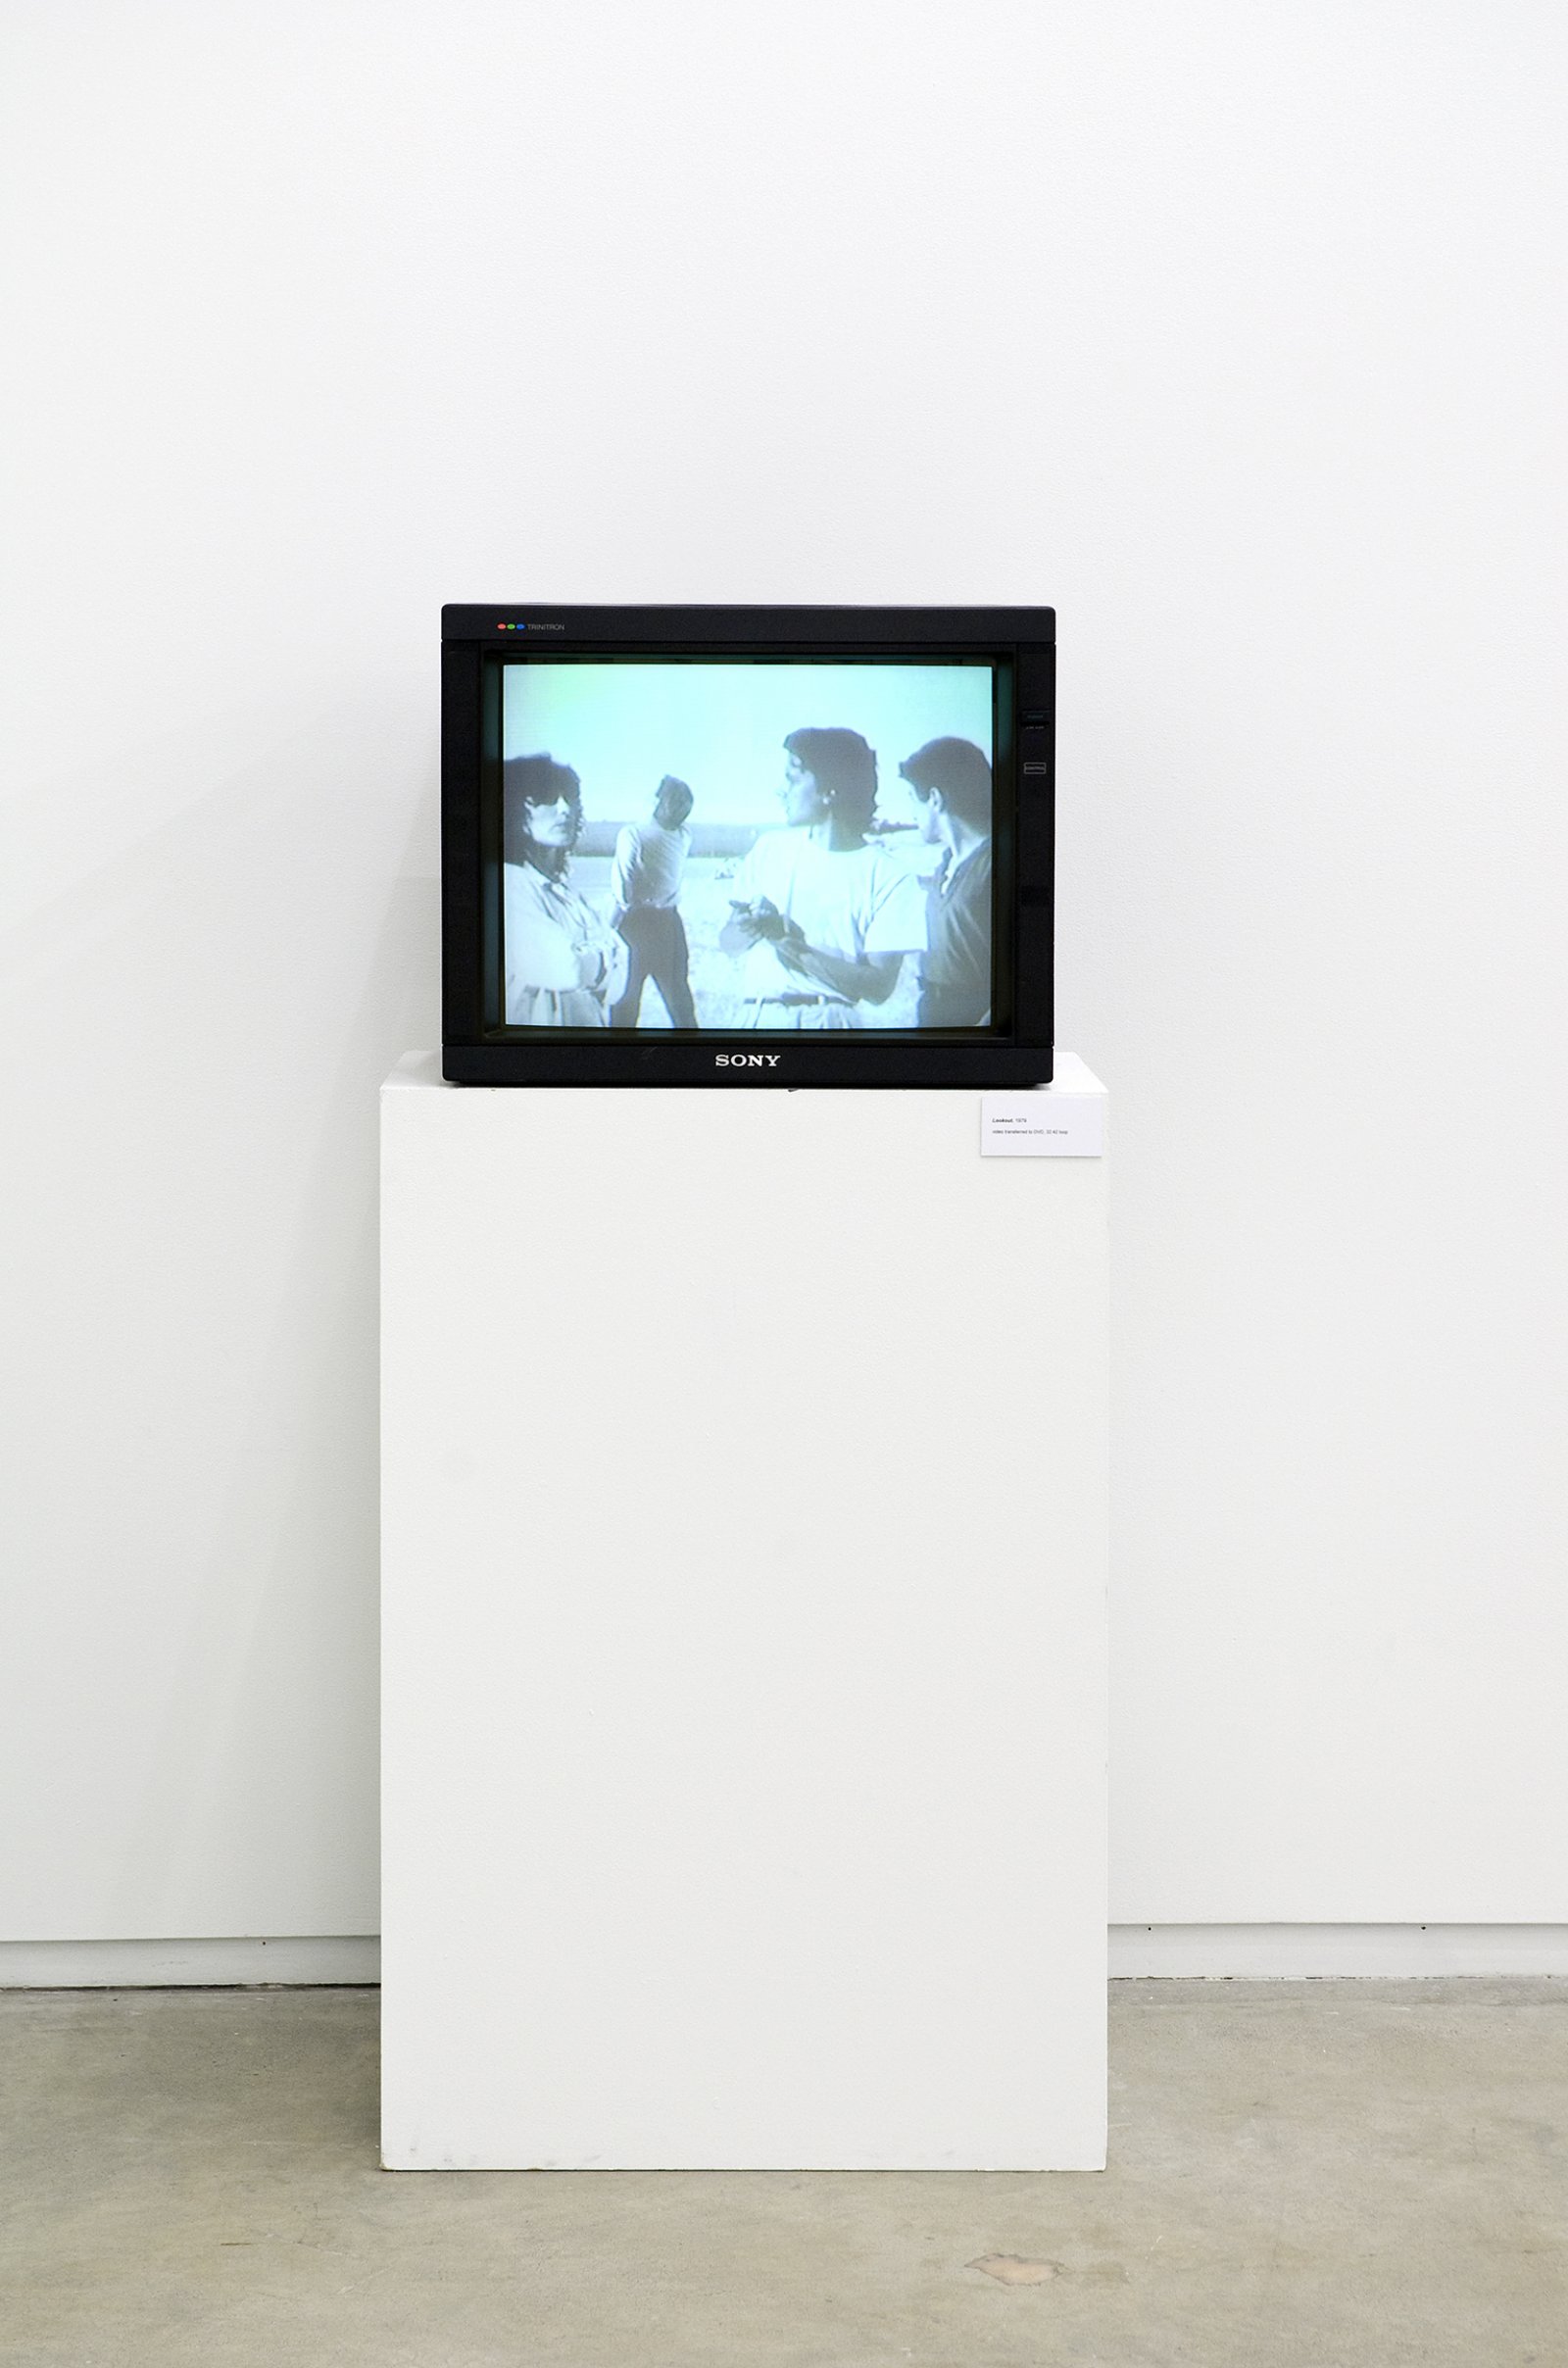 Ian Wallace, Lookout, 1979, 3/4 inch video transferred to DVD, 32 minutes, 42 seconds looped by Ian Wallace